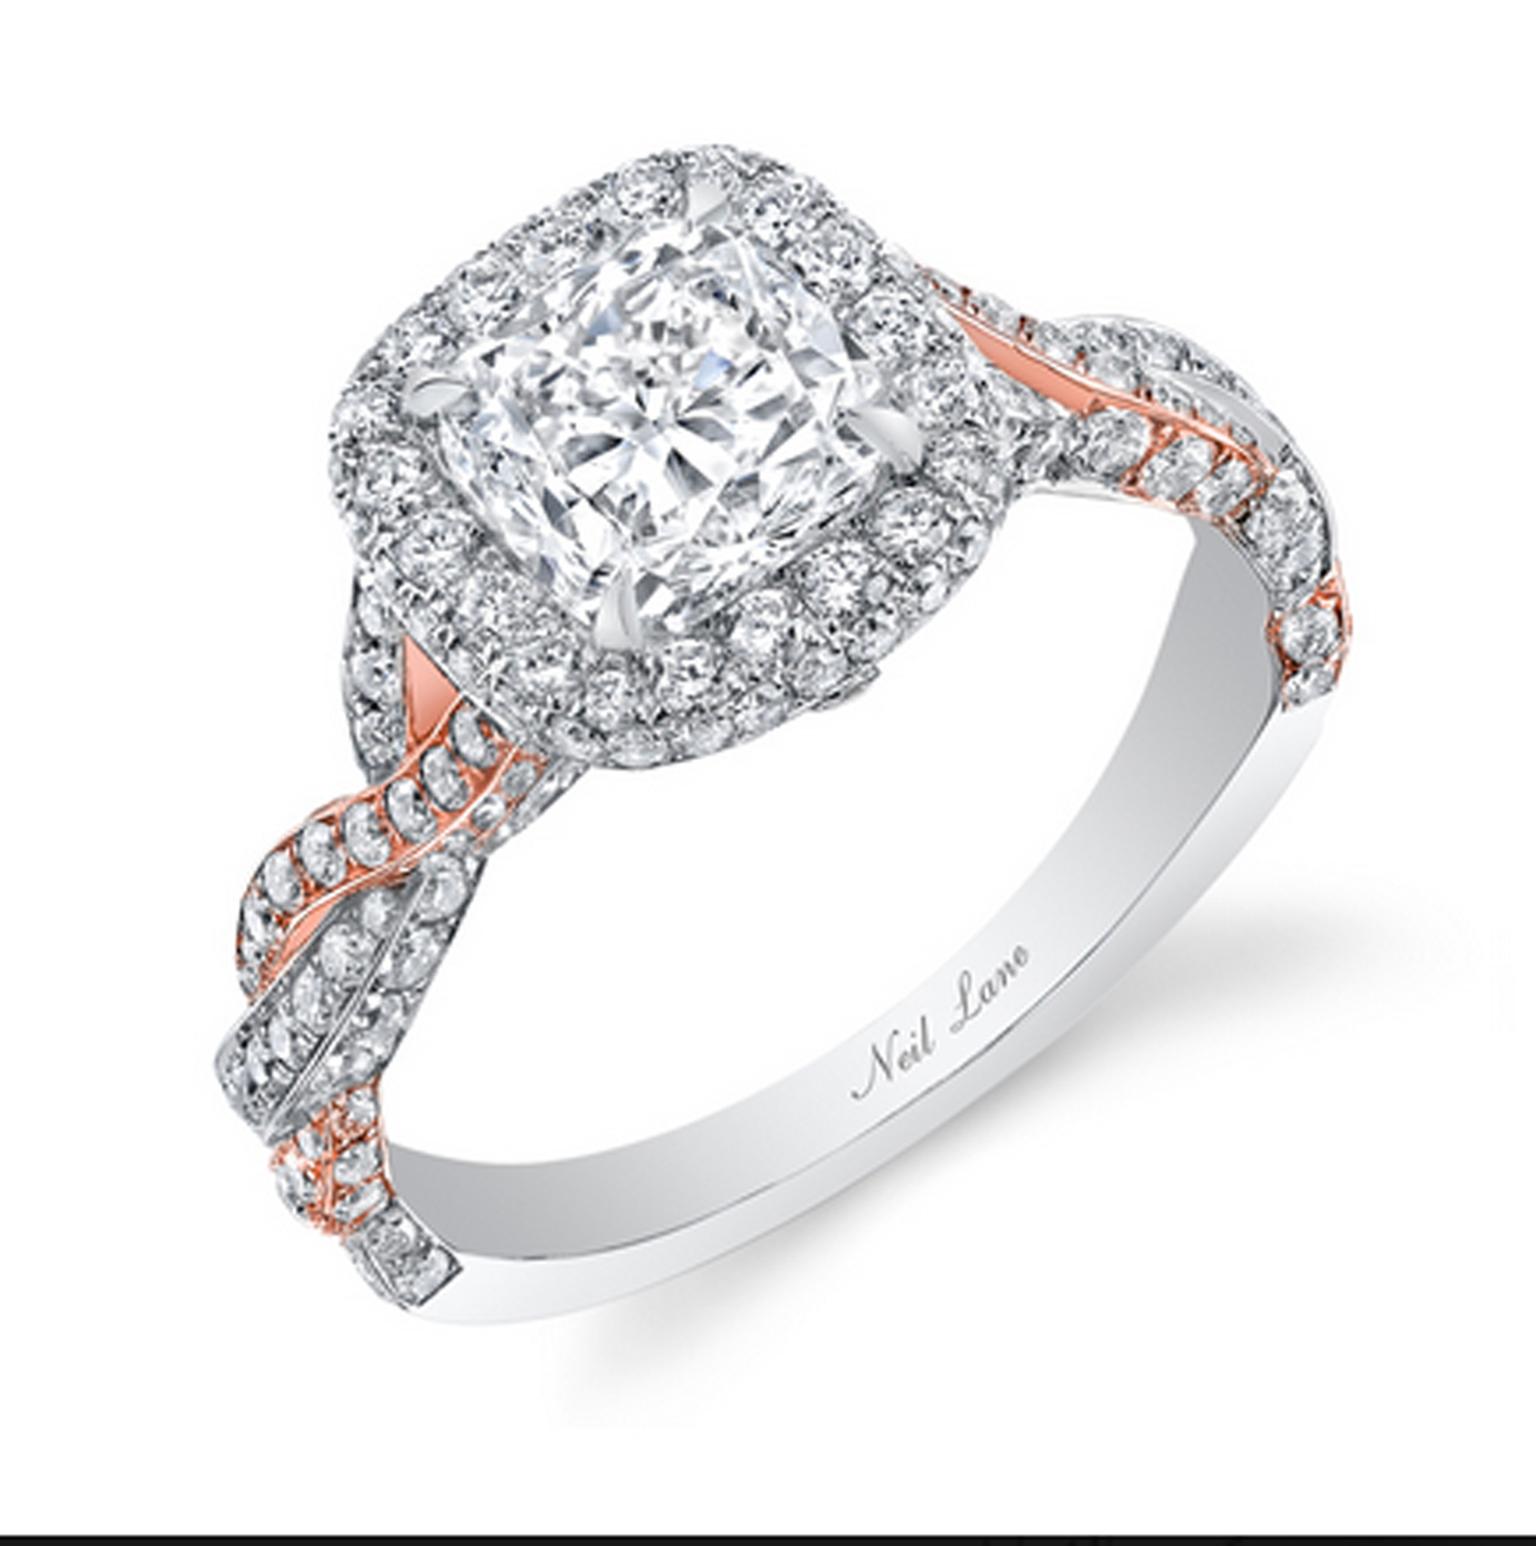 The Neil Lane Romantic Entwined Ring